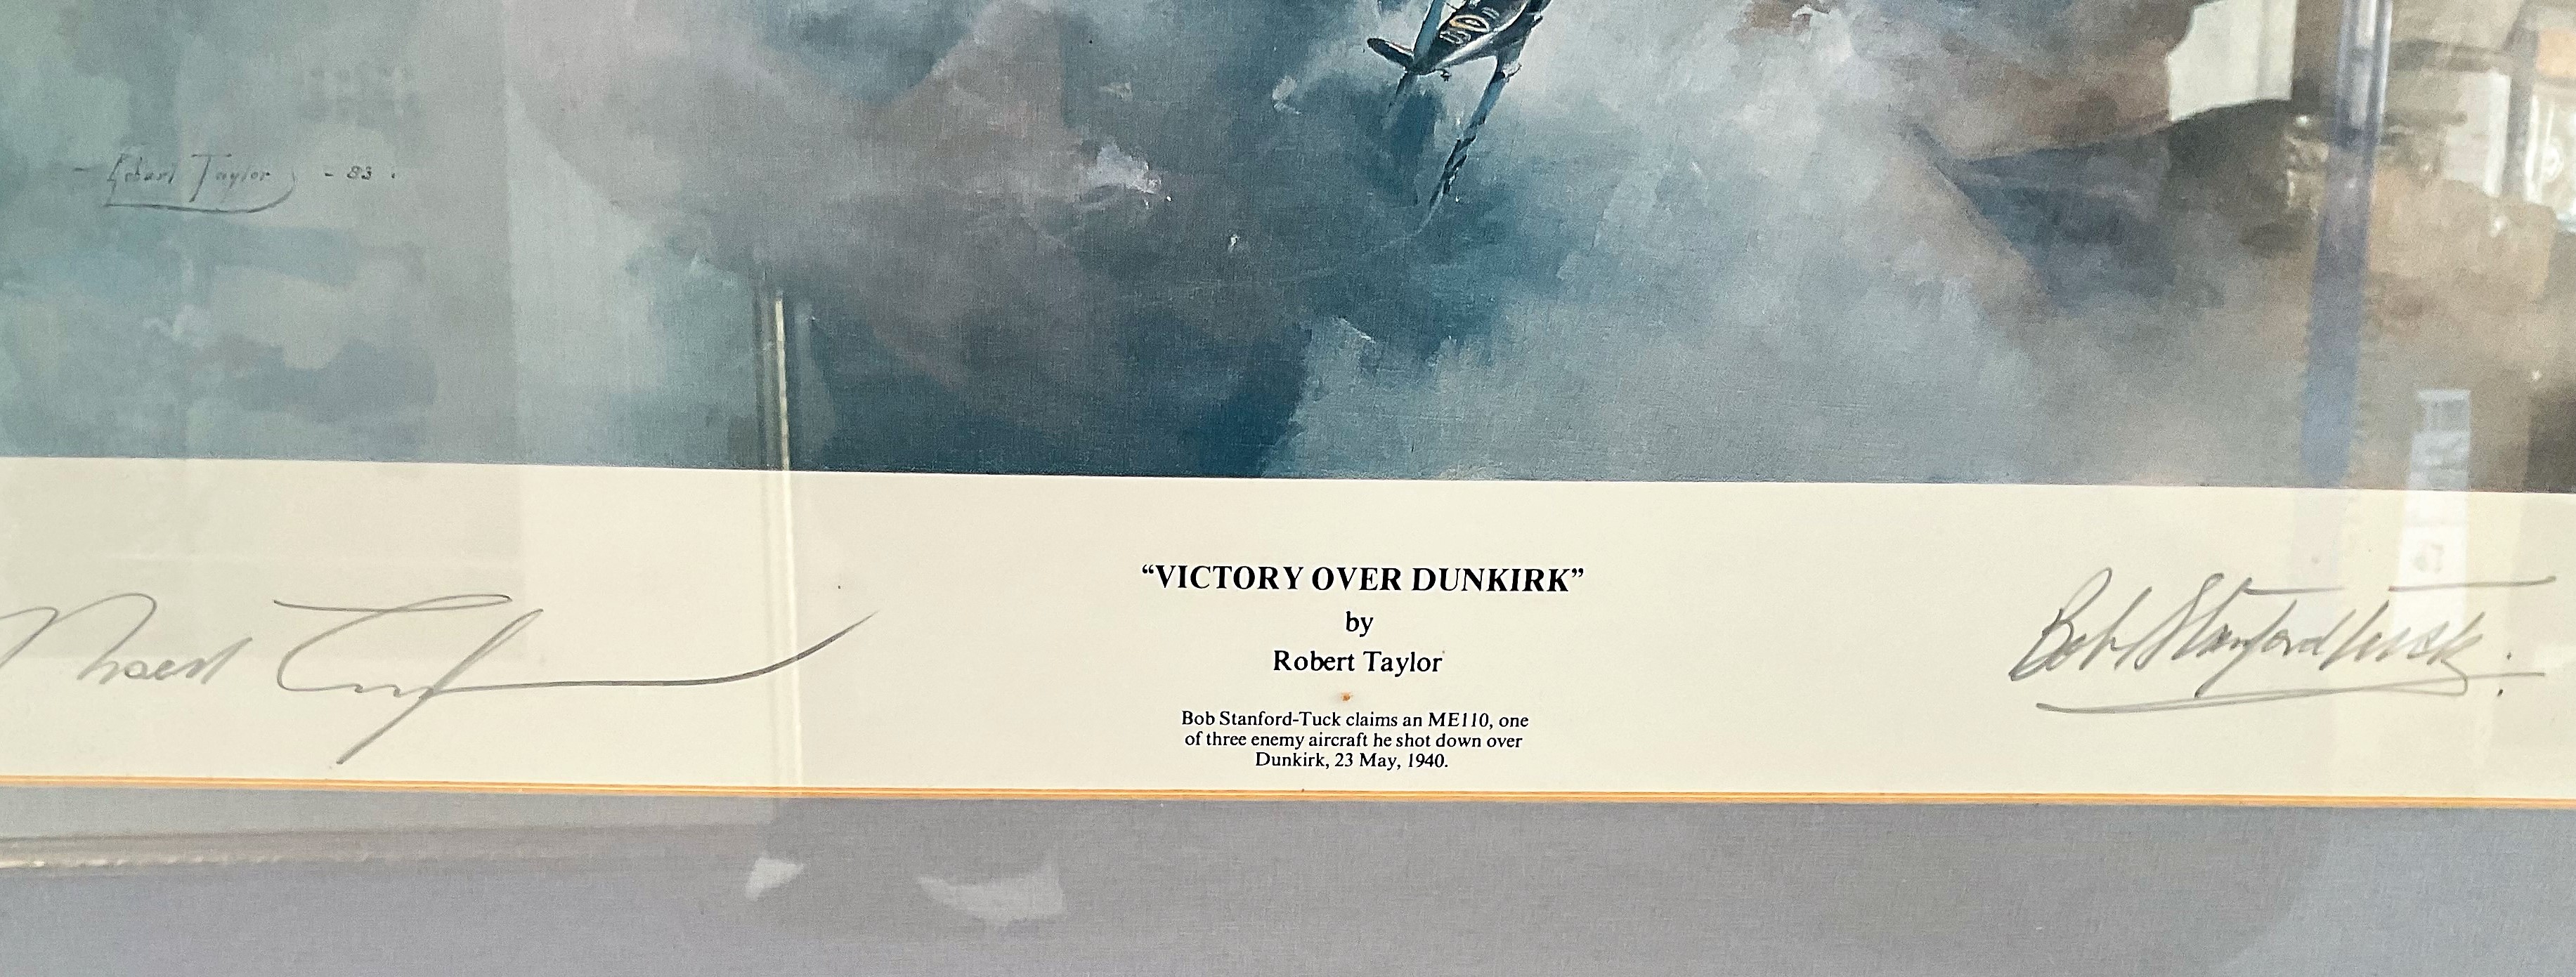 Robert Stanford-Tuck Signed Robert Taylor Print. Titled "Victory Over Dunkirk". Also signed by the - Image 2 of 2